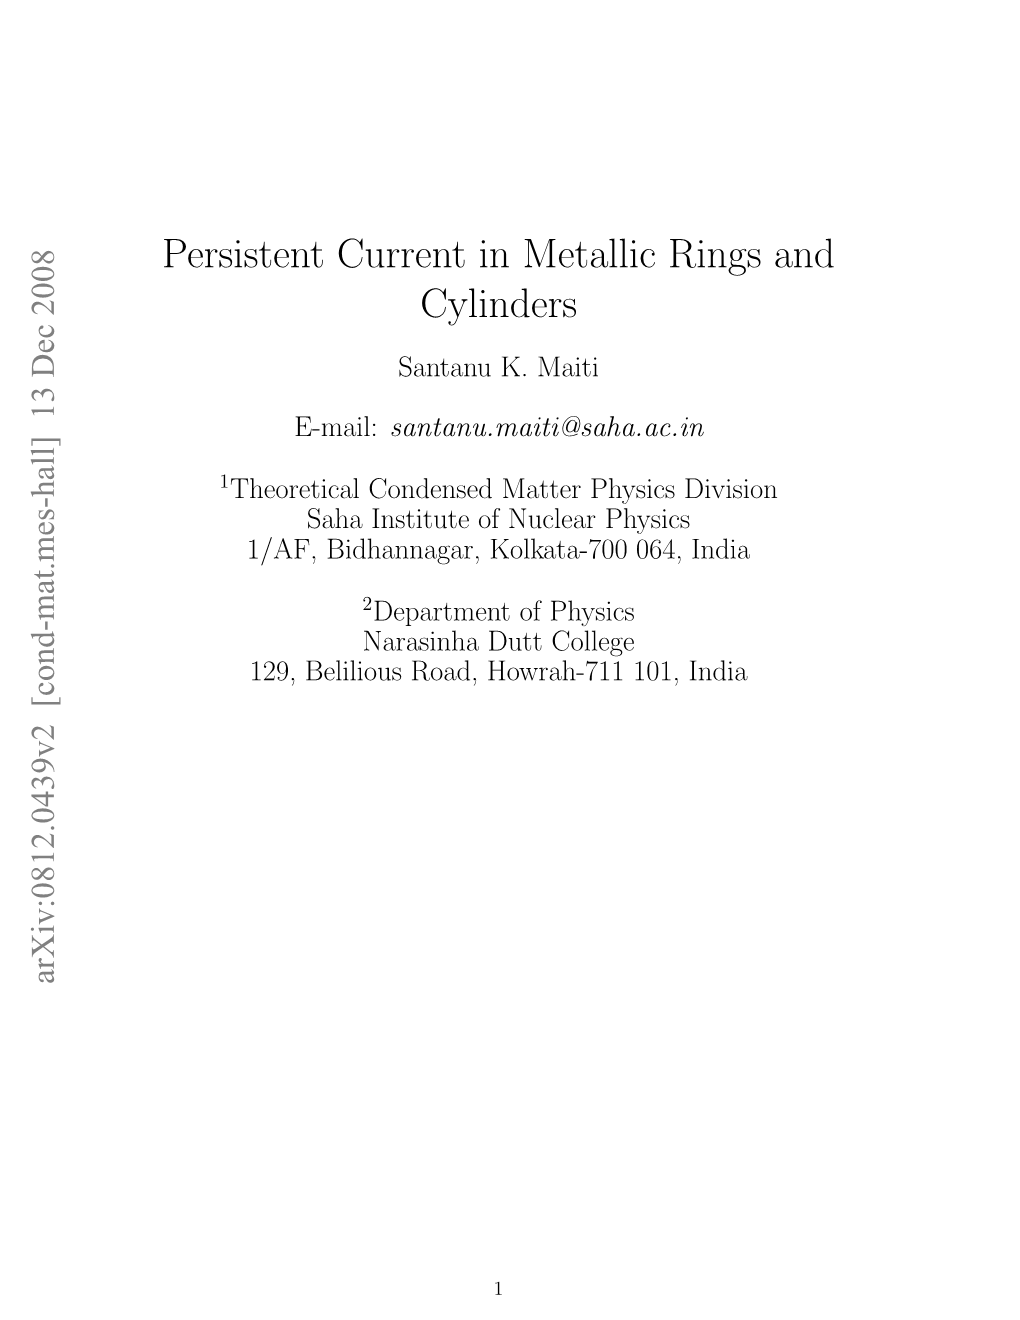 Persistent Current in Metallic Rings and Cylinders